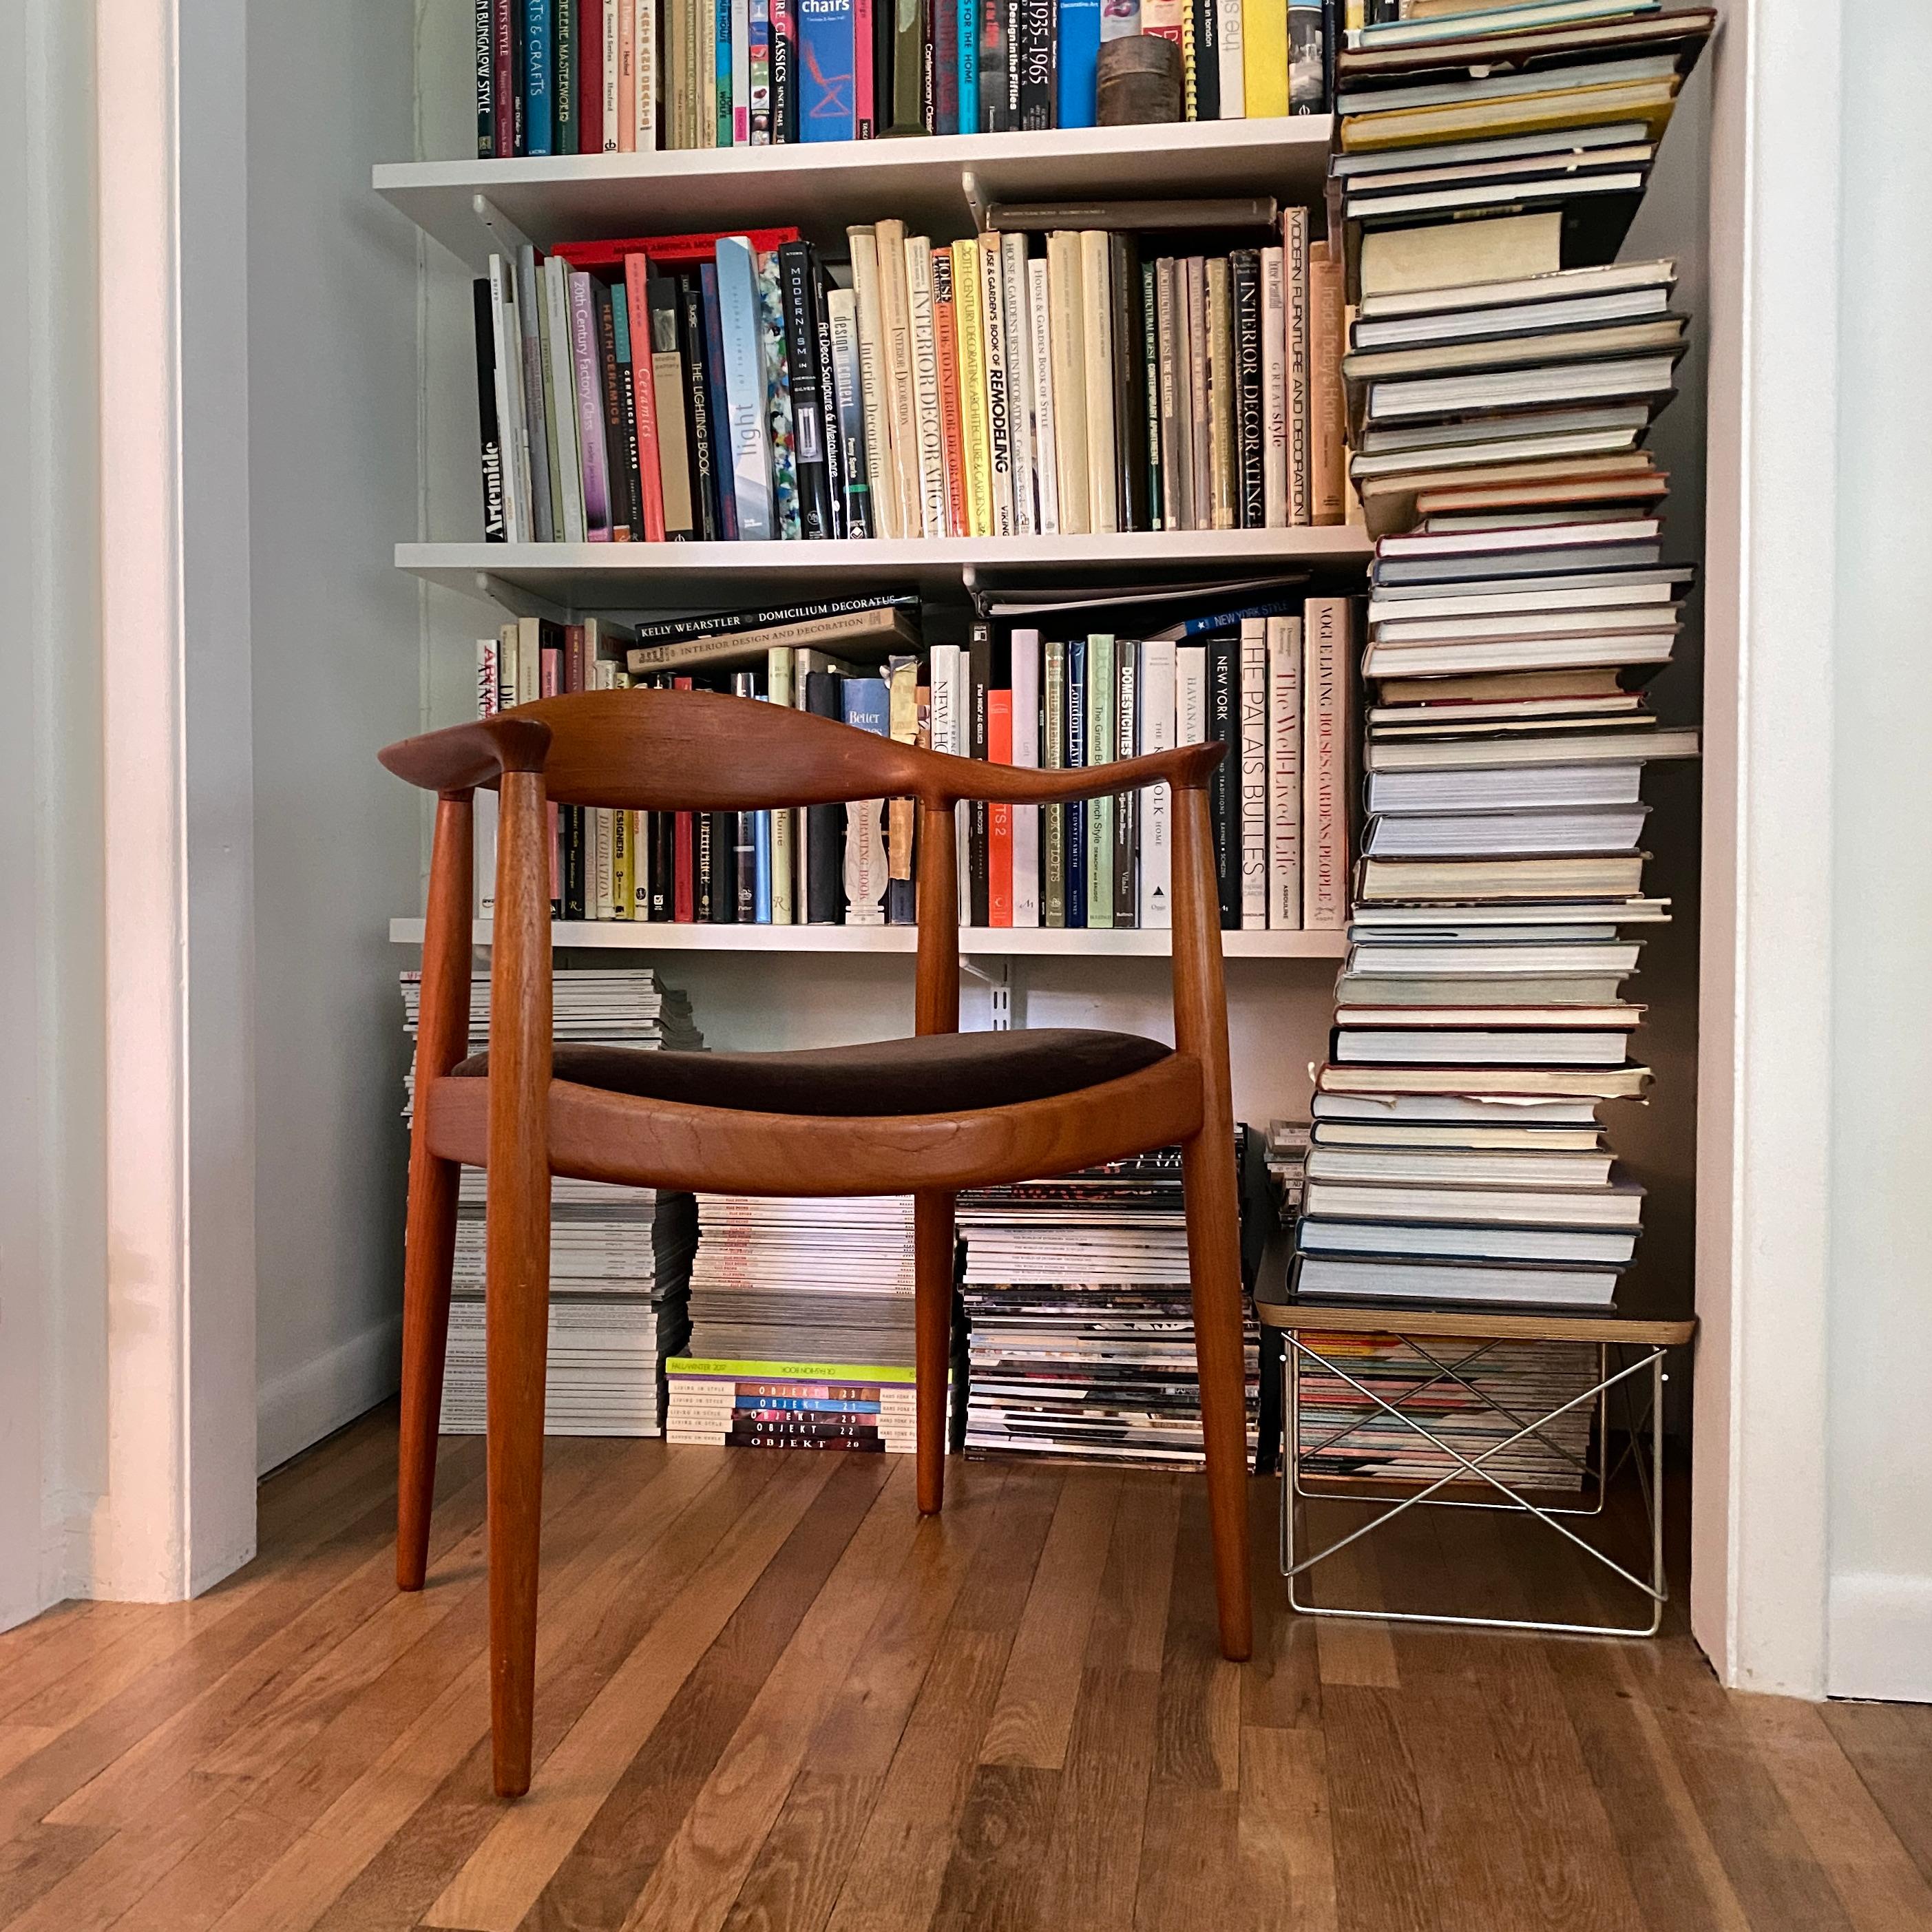 A vintage solid oak armchair designed by Hans Wegner in 1948, model number JH-503 for Johannes Hansen in Copenhagen, Denmark. The chair became immensely popular and was dubbed 